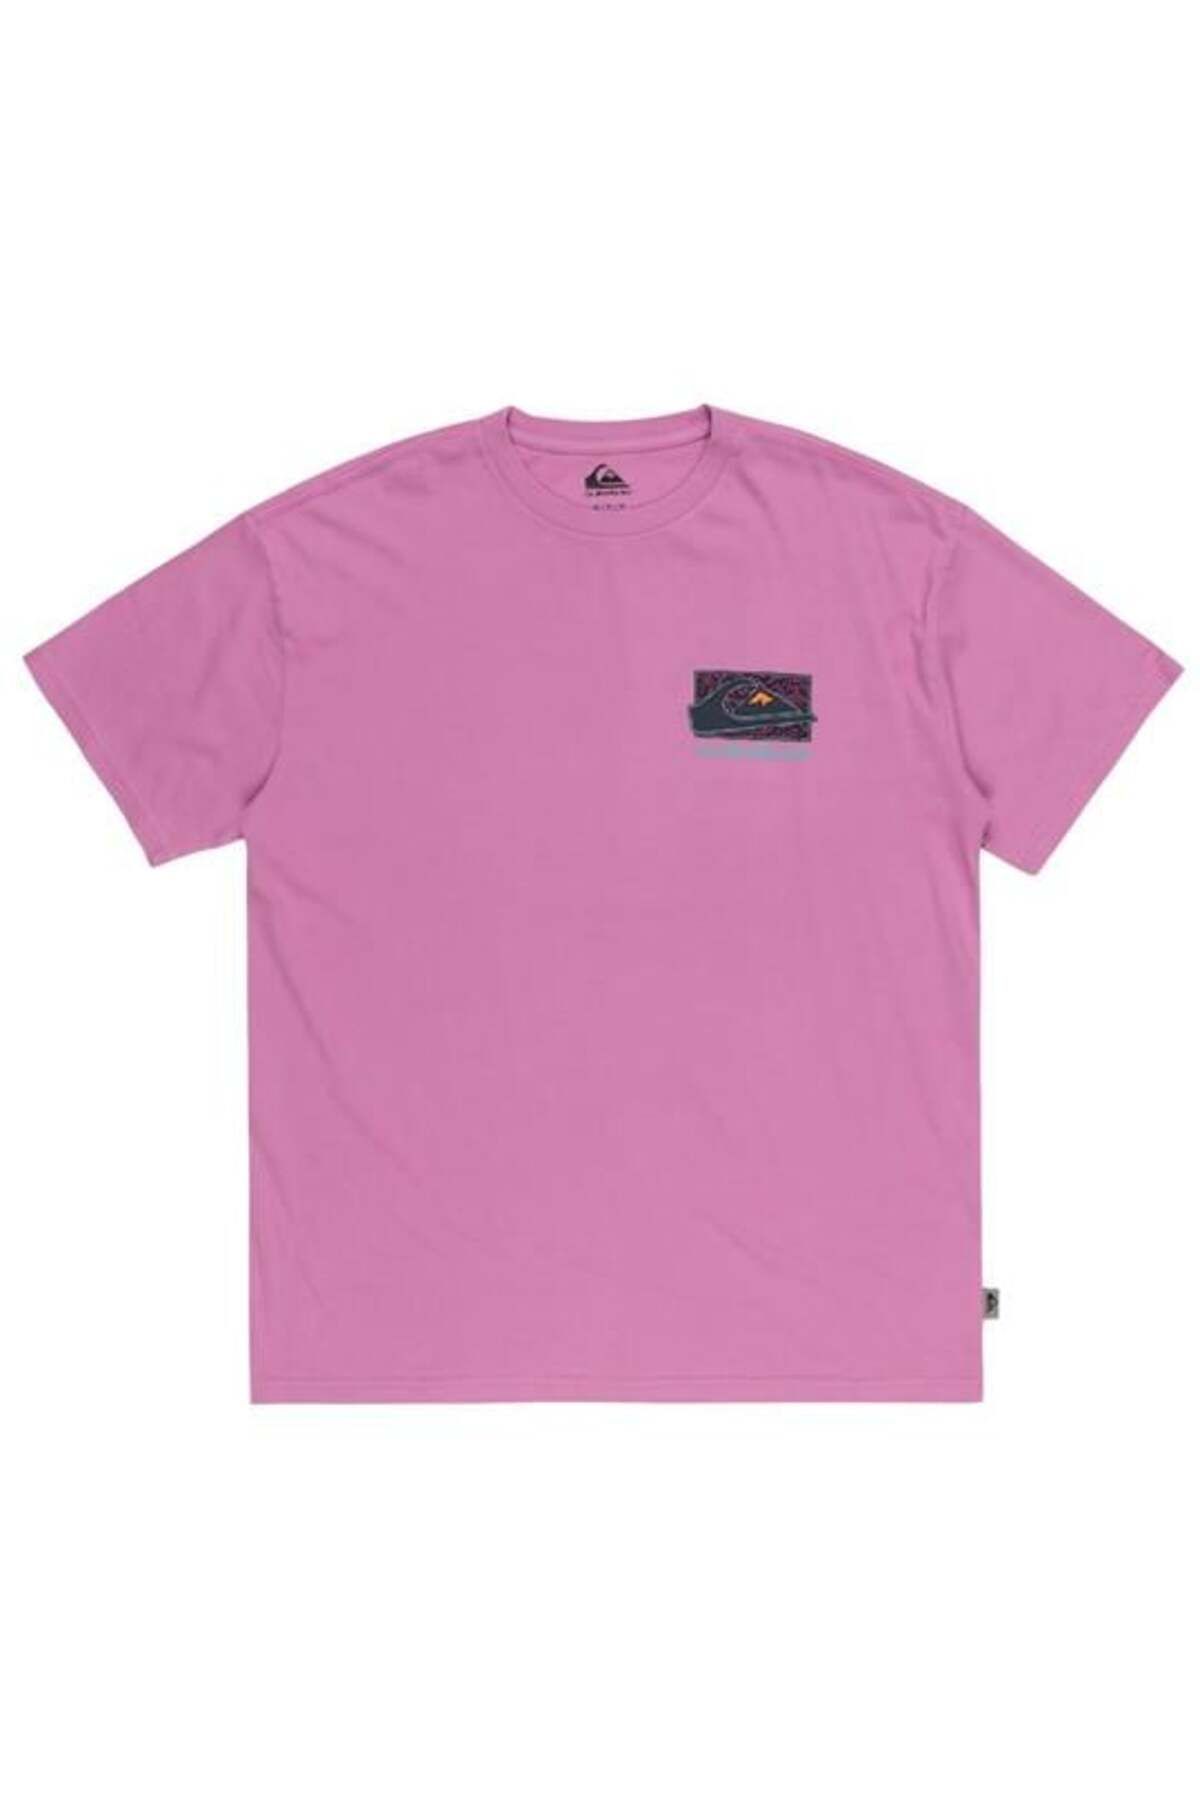 Quiksilver SPIN CYCLE SS ERKEK T-SHIRT VIOLET-PMP0-